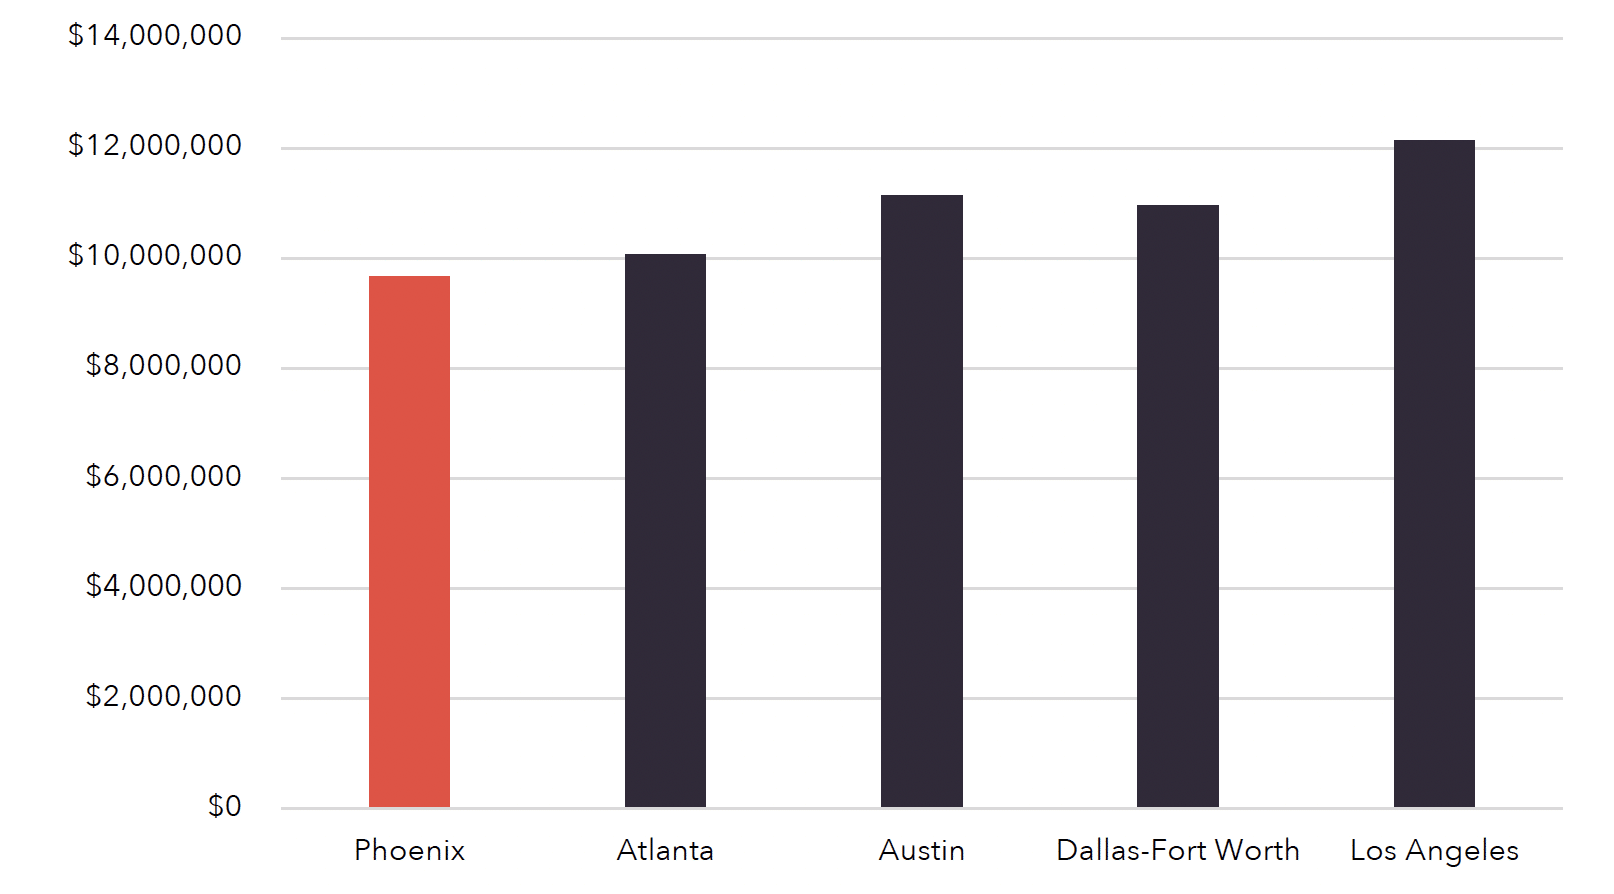 Bar chart depicting cost comparisons for advanced manufacturing operations in different leading regions. Phoenix's bar is in red while the others are dark purple. Phoenix: $9.66M Atlanta: $10.08M Austin: $11.14M Dallas-Fort Worth: $10.96M Los Angeles: $12.15M